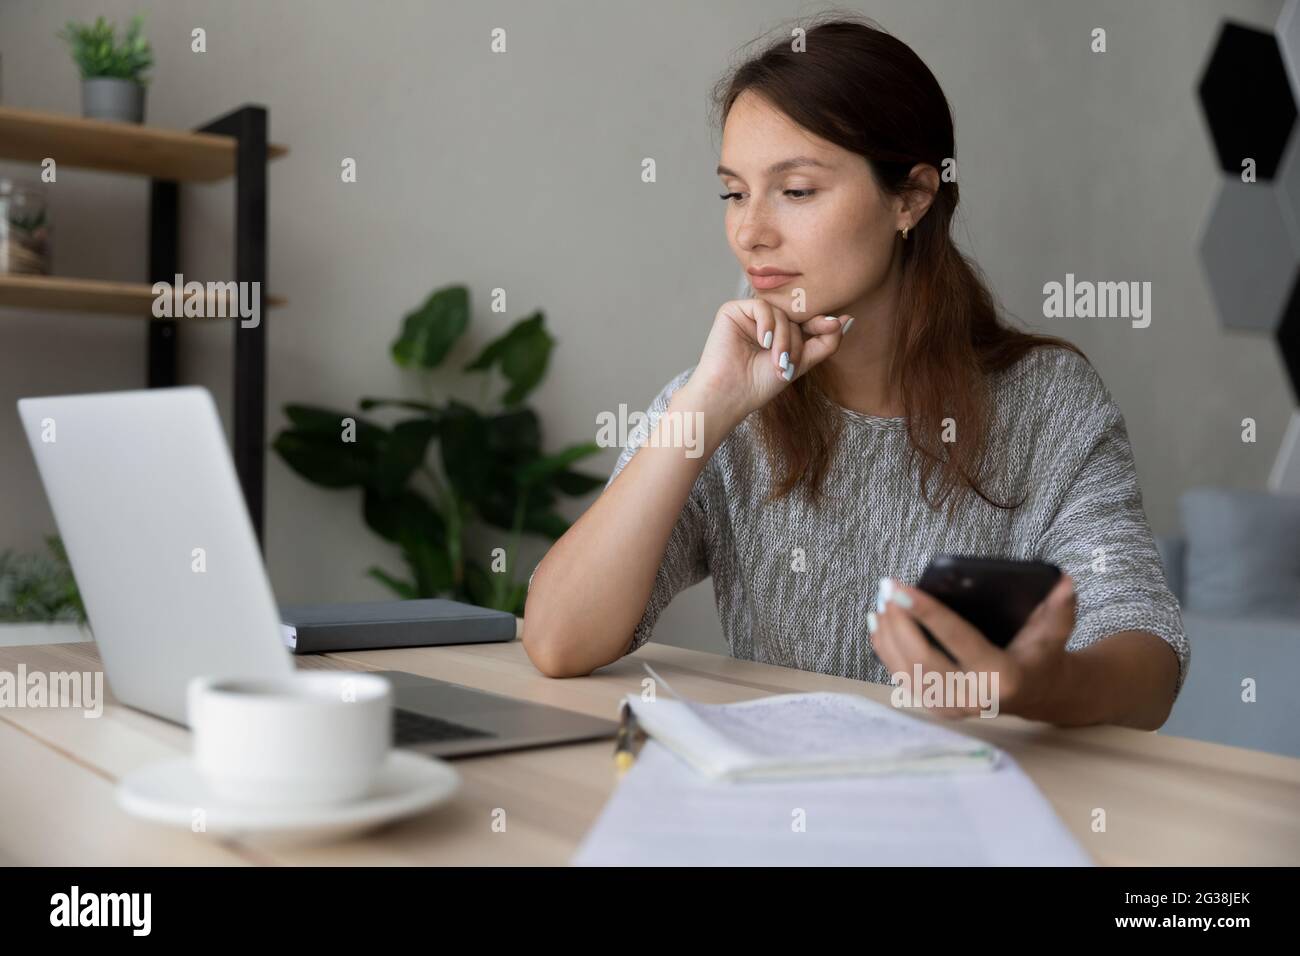 Thoughtful confident businesswoman looking at laptop screen, holding smartphone Stock Photo